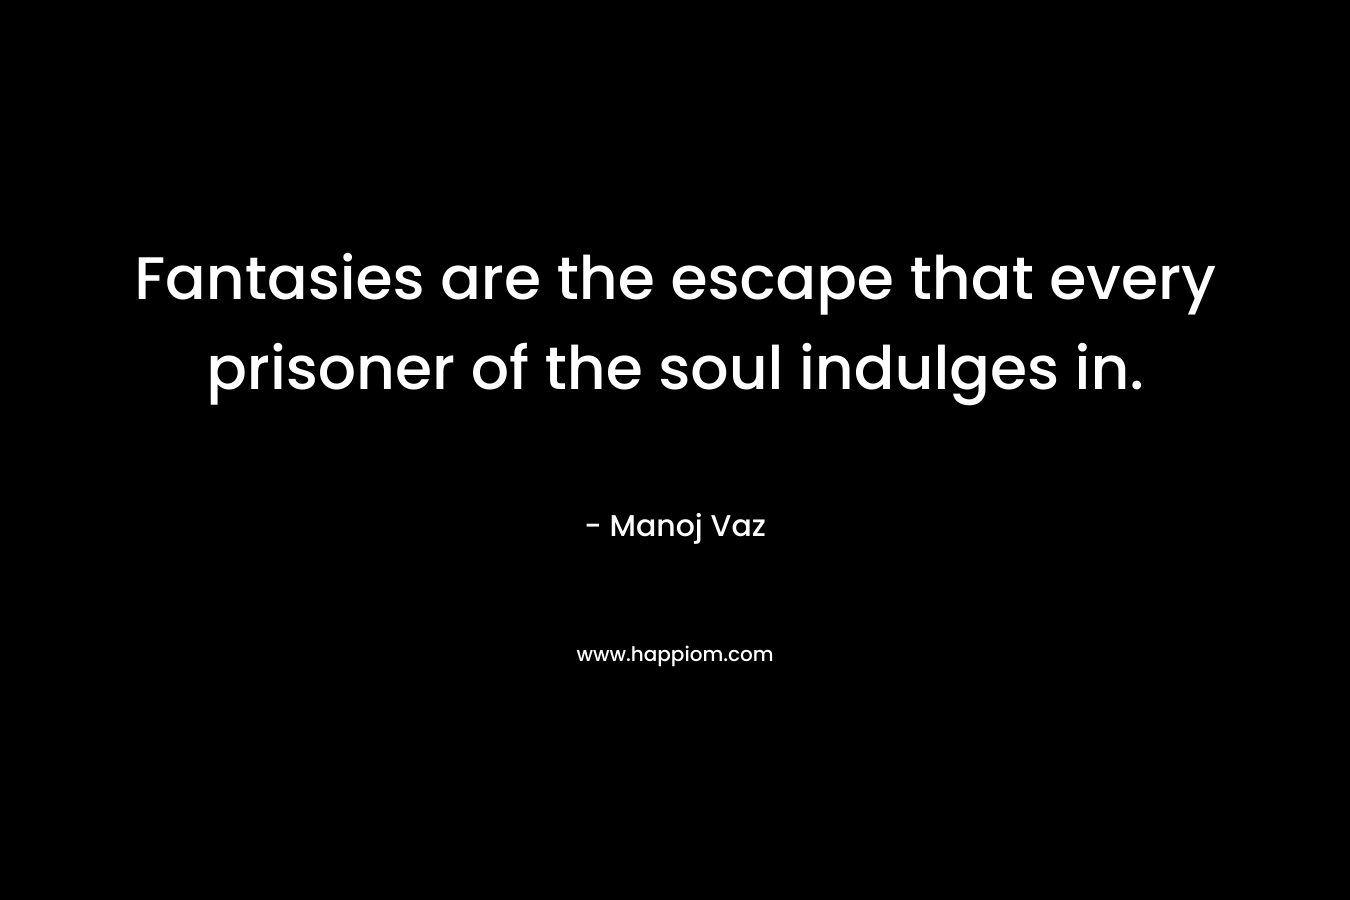 Fantasies are the escape that every prisoner of the soul indulges in. – Manoj Vaz